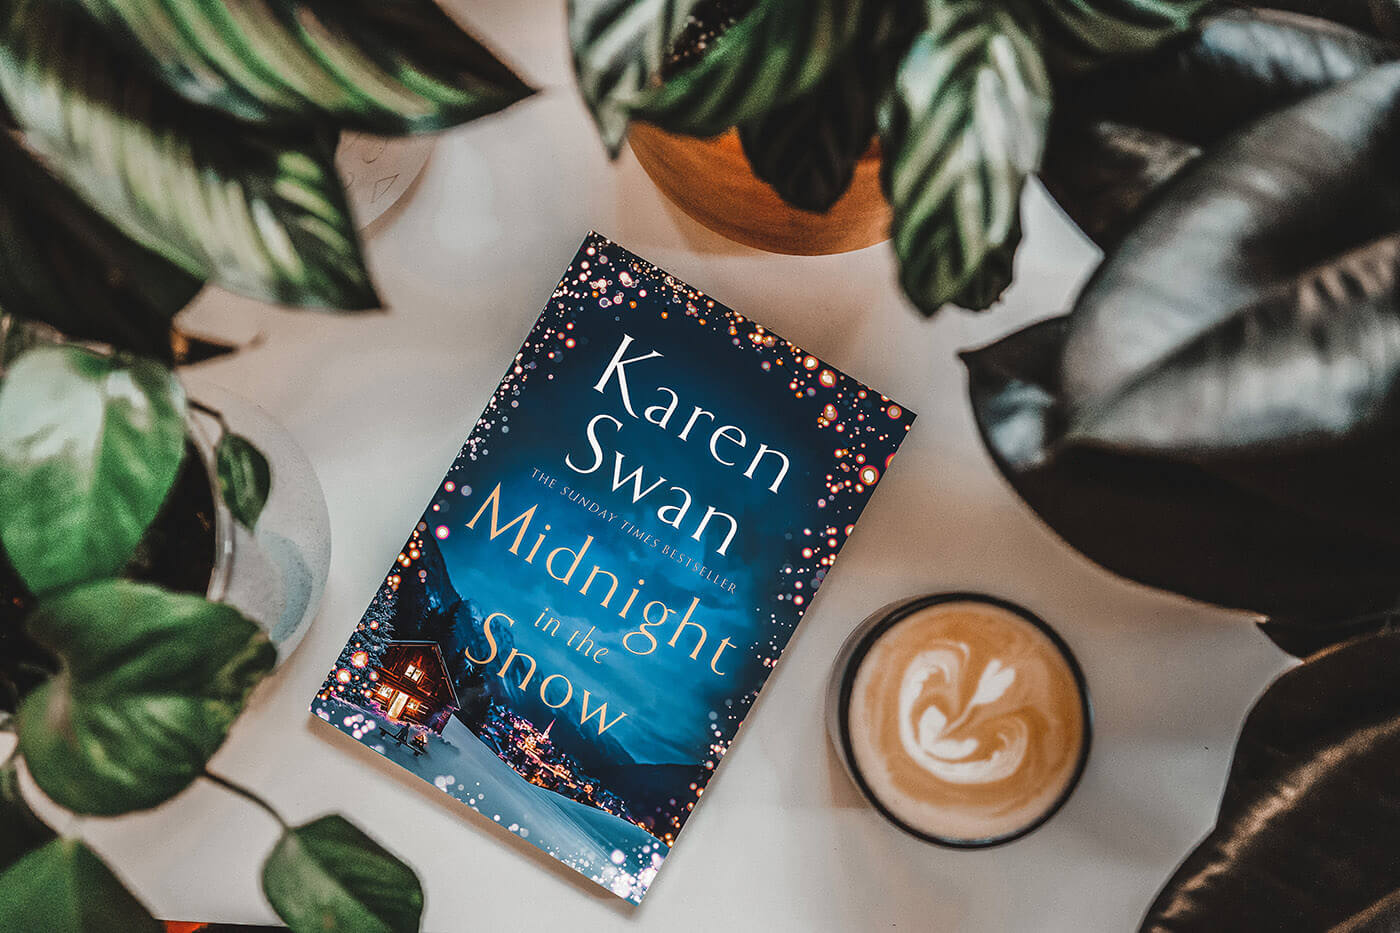 Book Review of Midnight In The Snow by Karen Swan